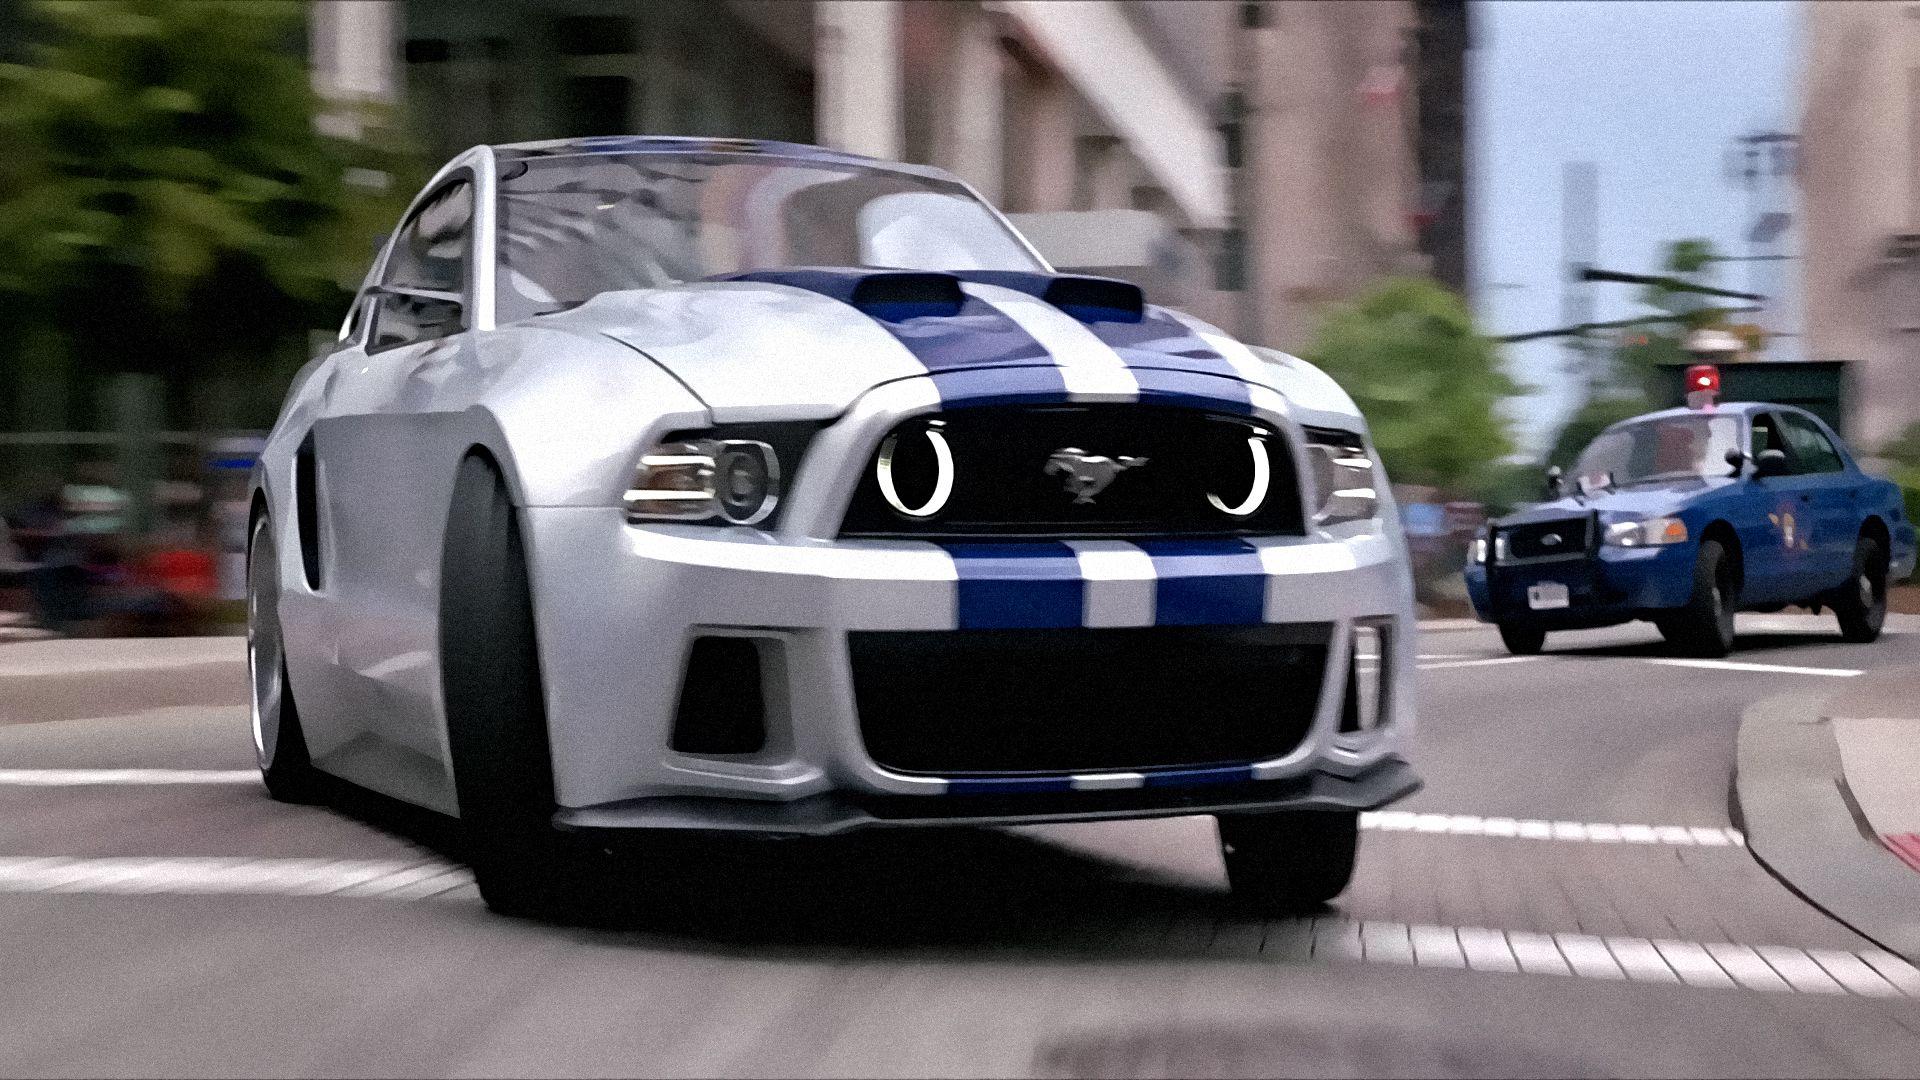 Need For Speed movie wallpaper 1920x1080 (8)